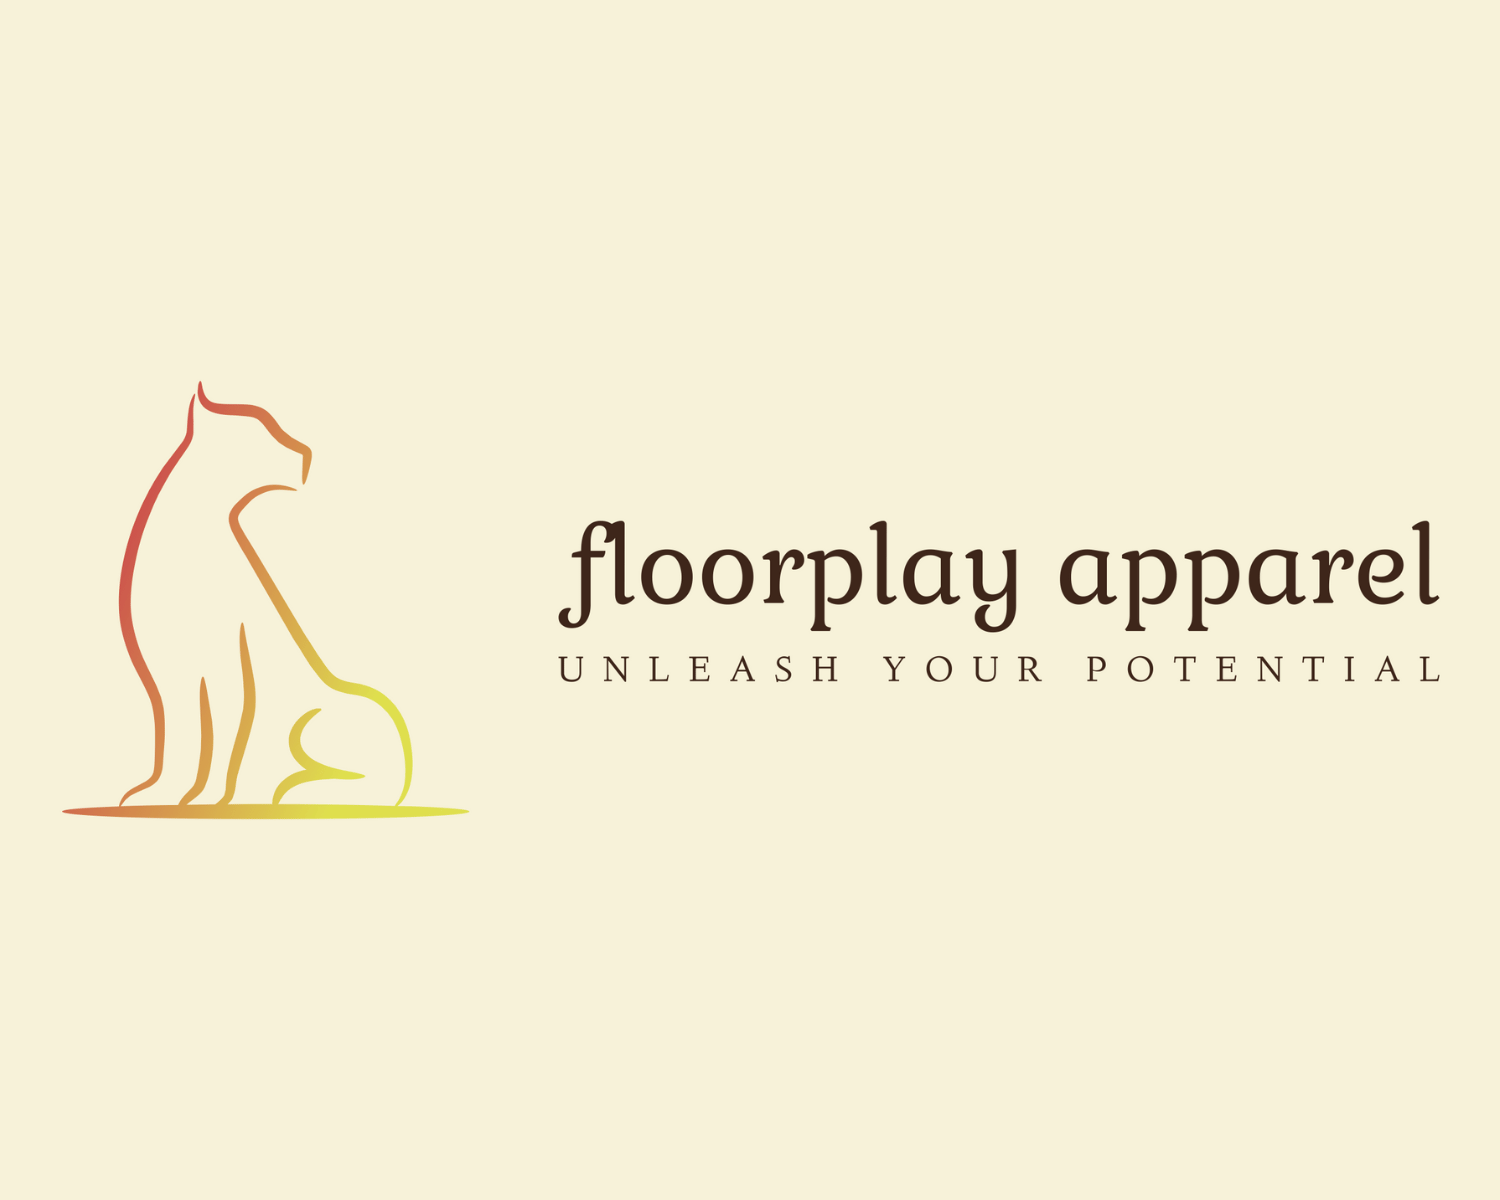 Floorplay Apparel Logo with Big Cat silhouette. Tagline: "Unleash Your Potential"